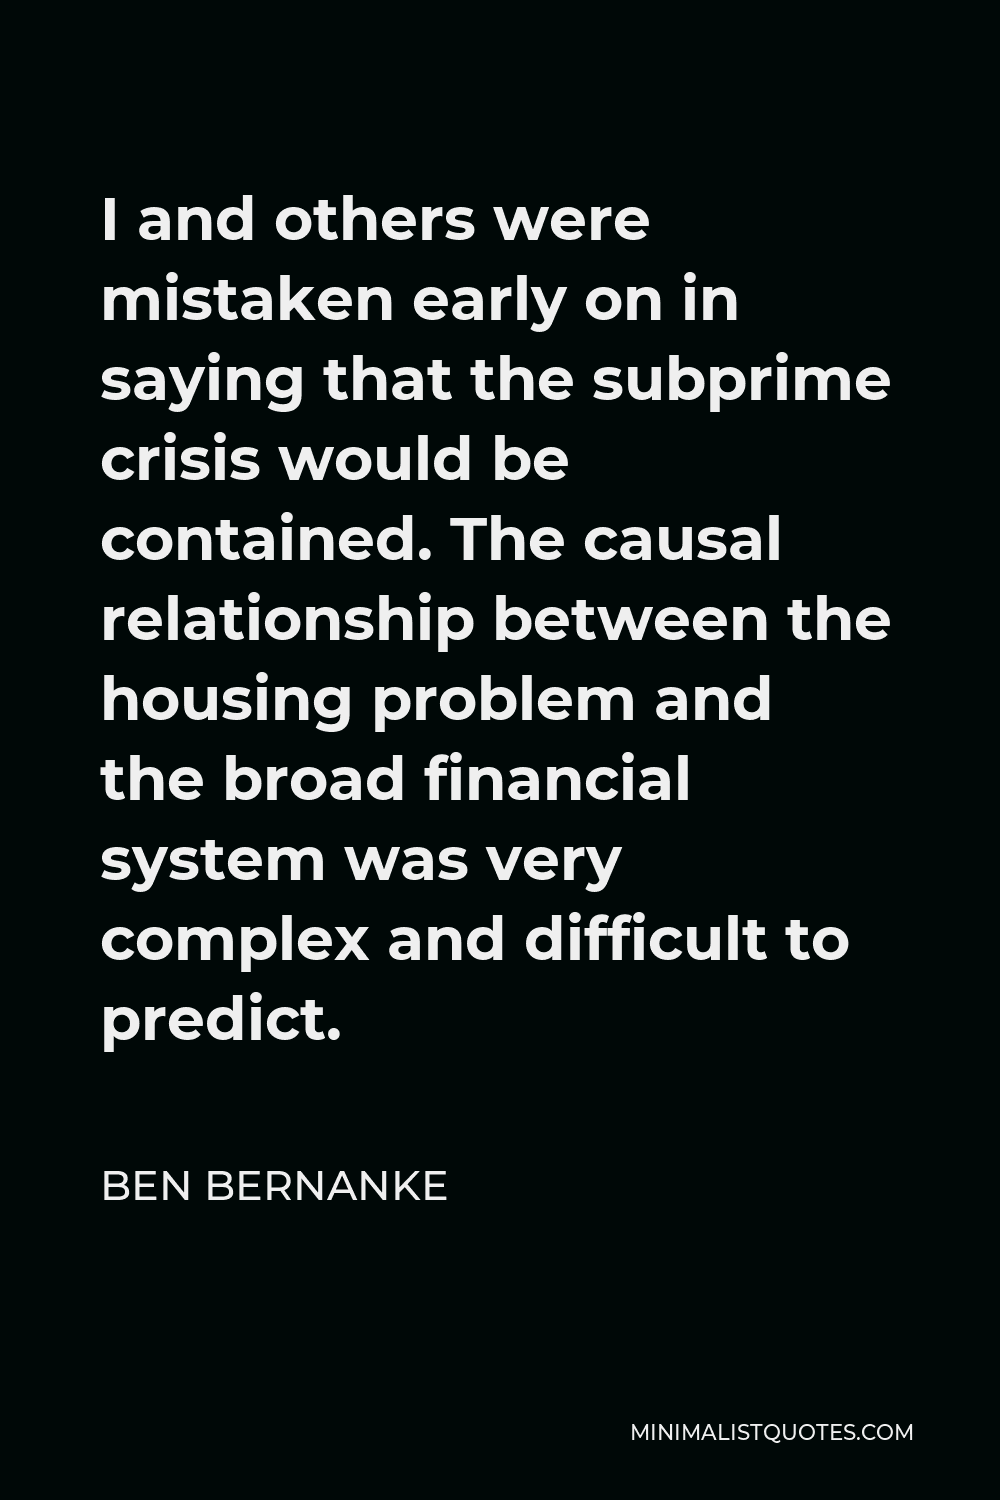 Ben Bernanke Quote - I and others were mistaken early on in saying that the subprime crisis would be contained. The causal relationship between the housing problem and the broad financial system was very complex and difficult to predict.